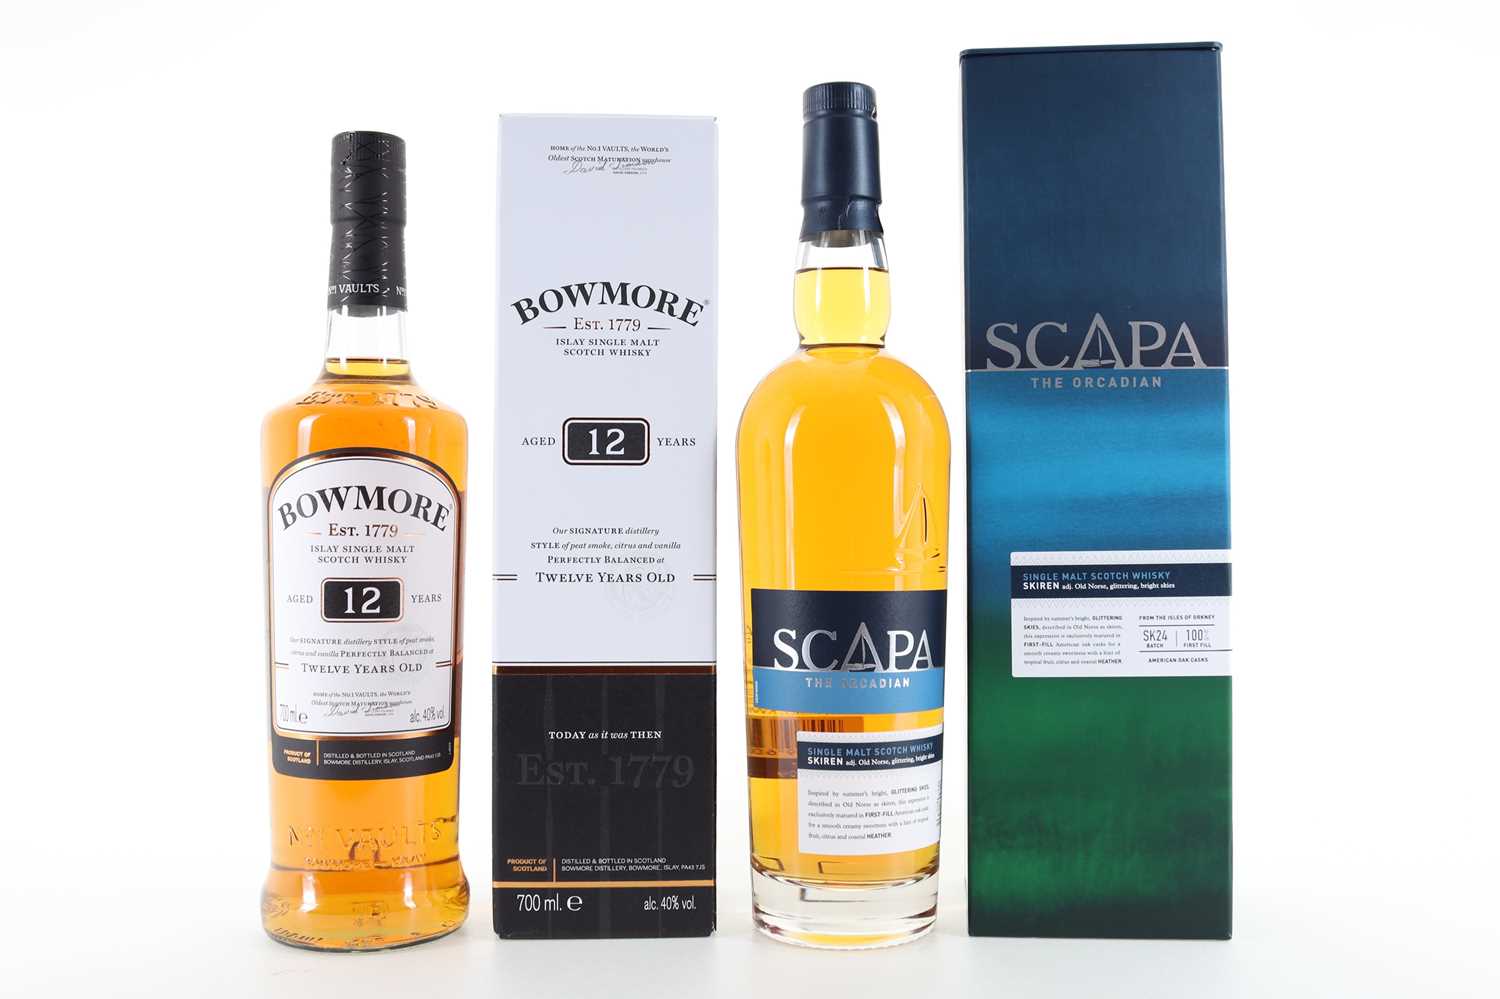 BOWMORE 12 YEAR OLD AND SCAPA SKIREN SINGLE MALT